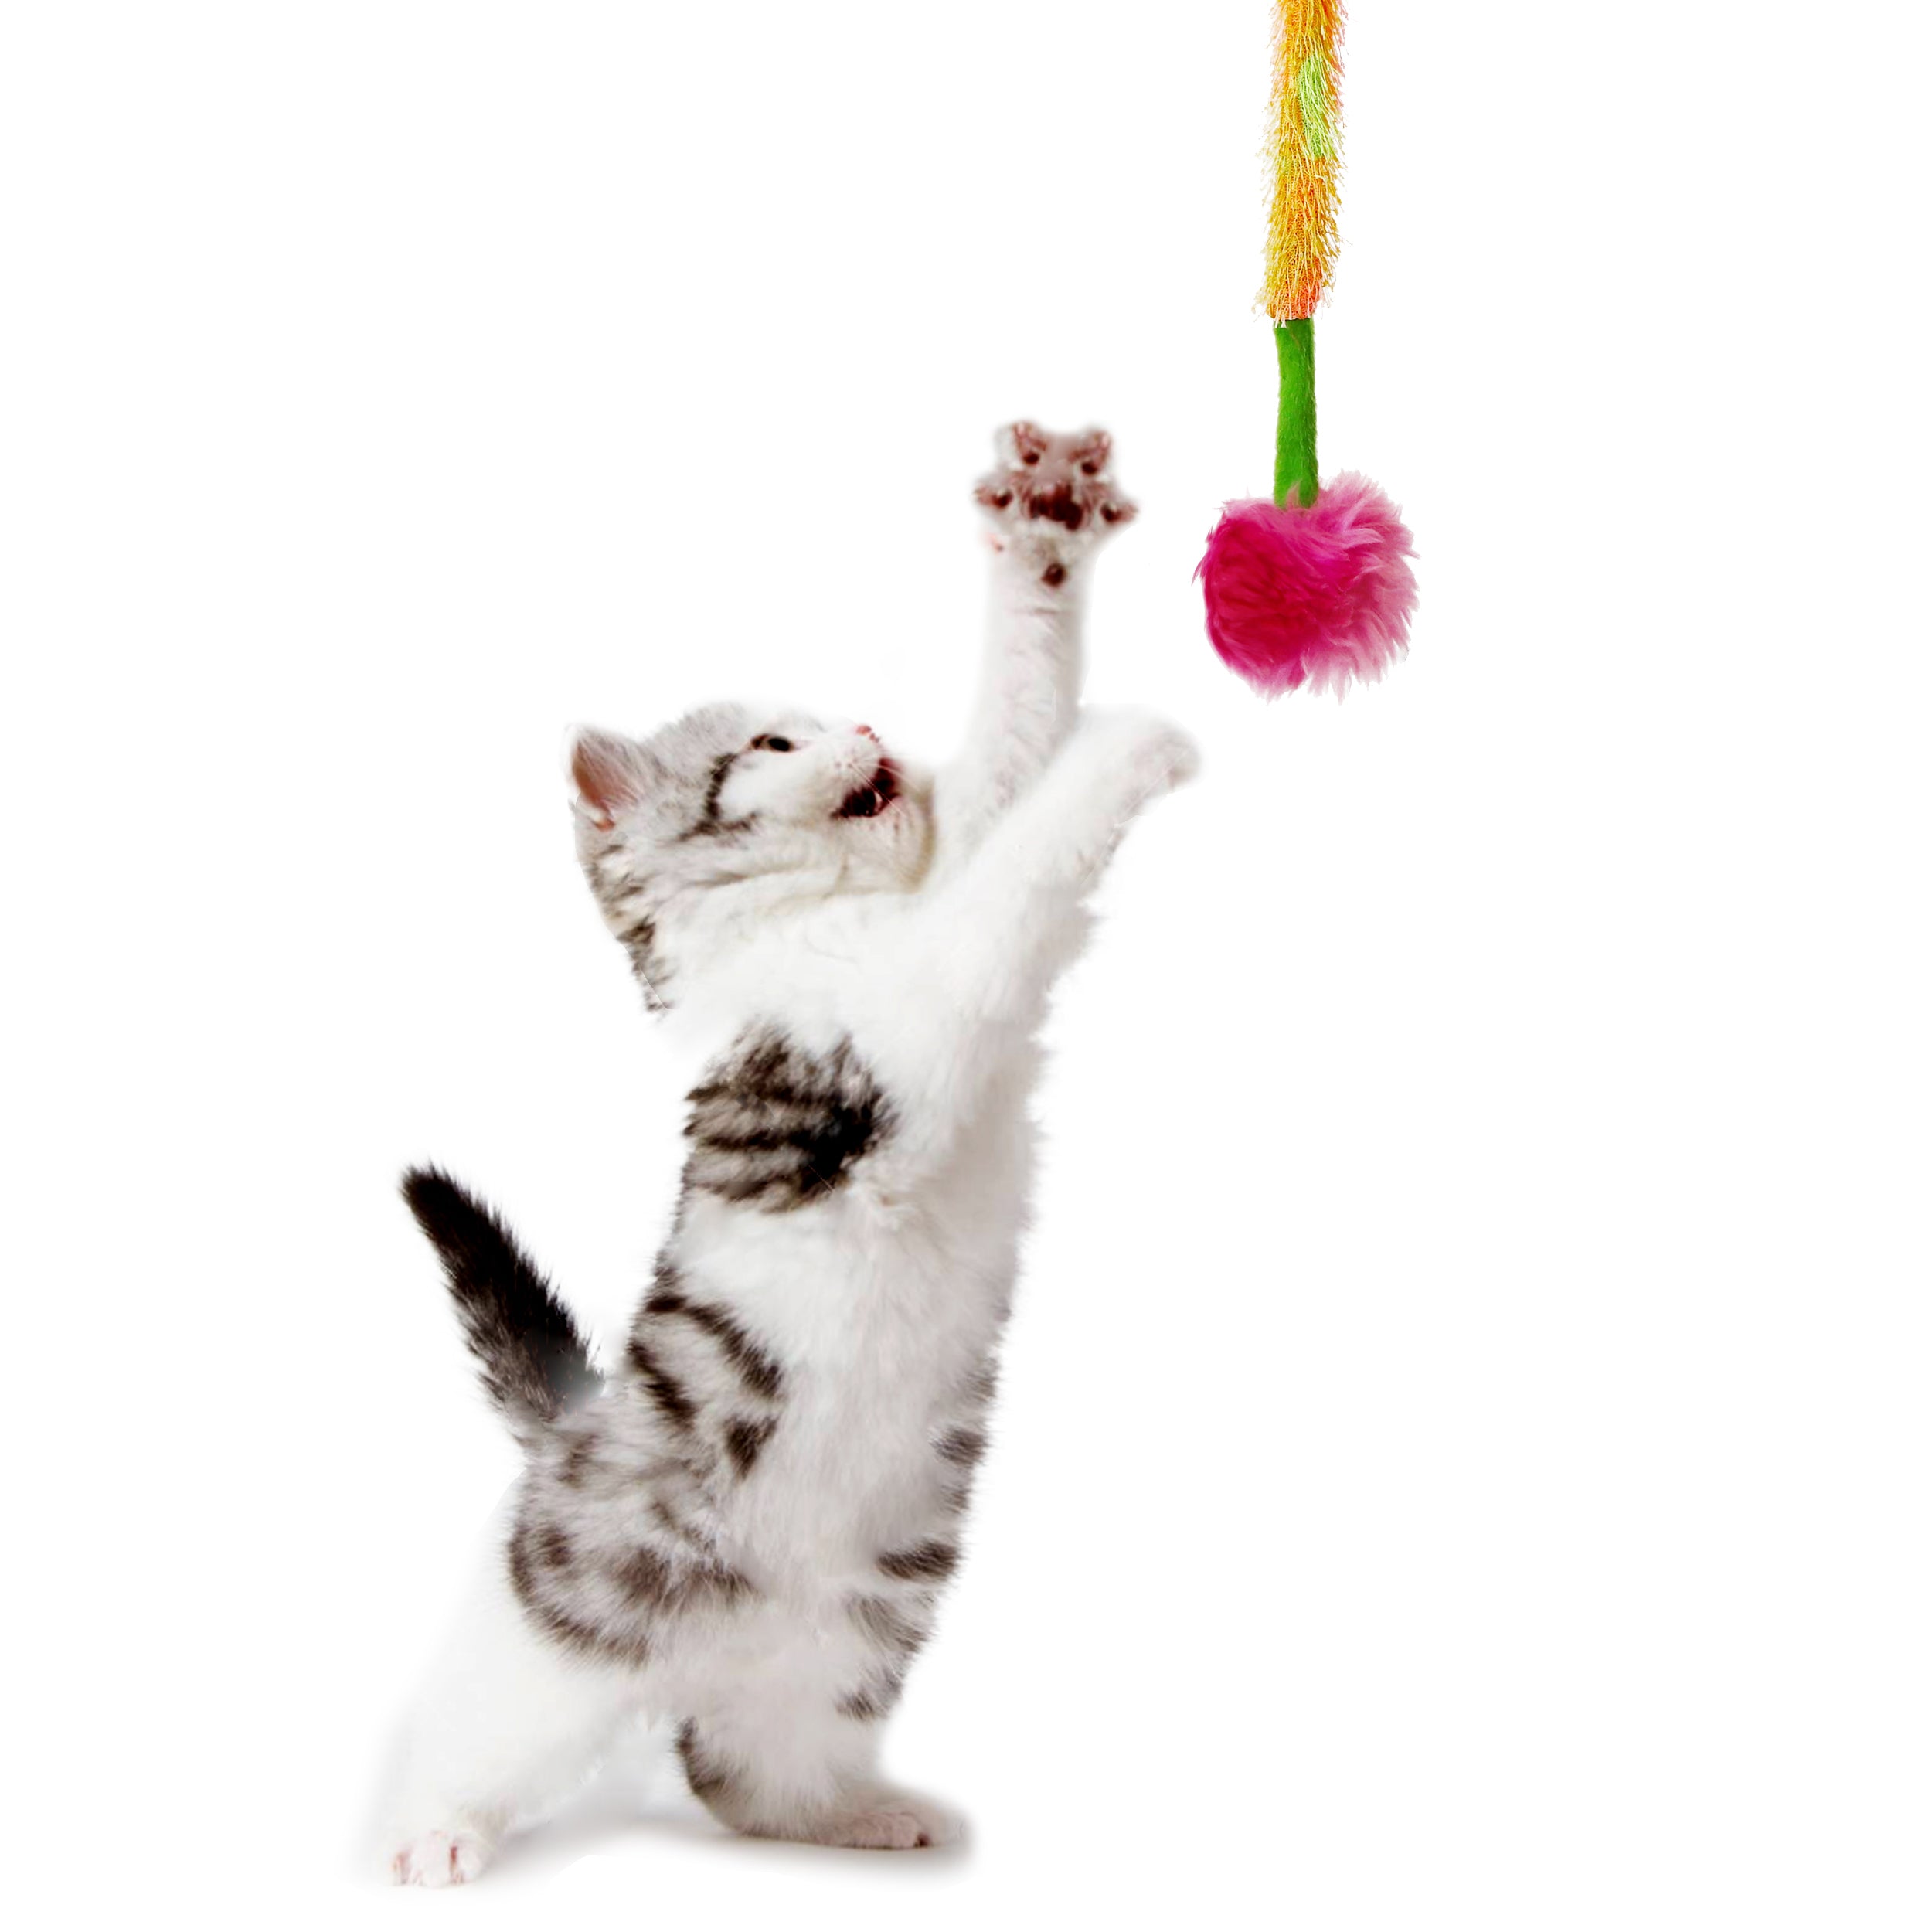 Interactive Crazy Cat Wand Stick toy Pink&Green with Pink Fuzzy Faux Fur Ball Fun String Cat toy for Cats and Kittens Detailed Model Kitten Crazy Play 